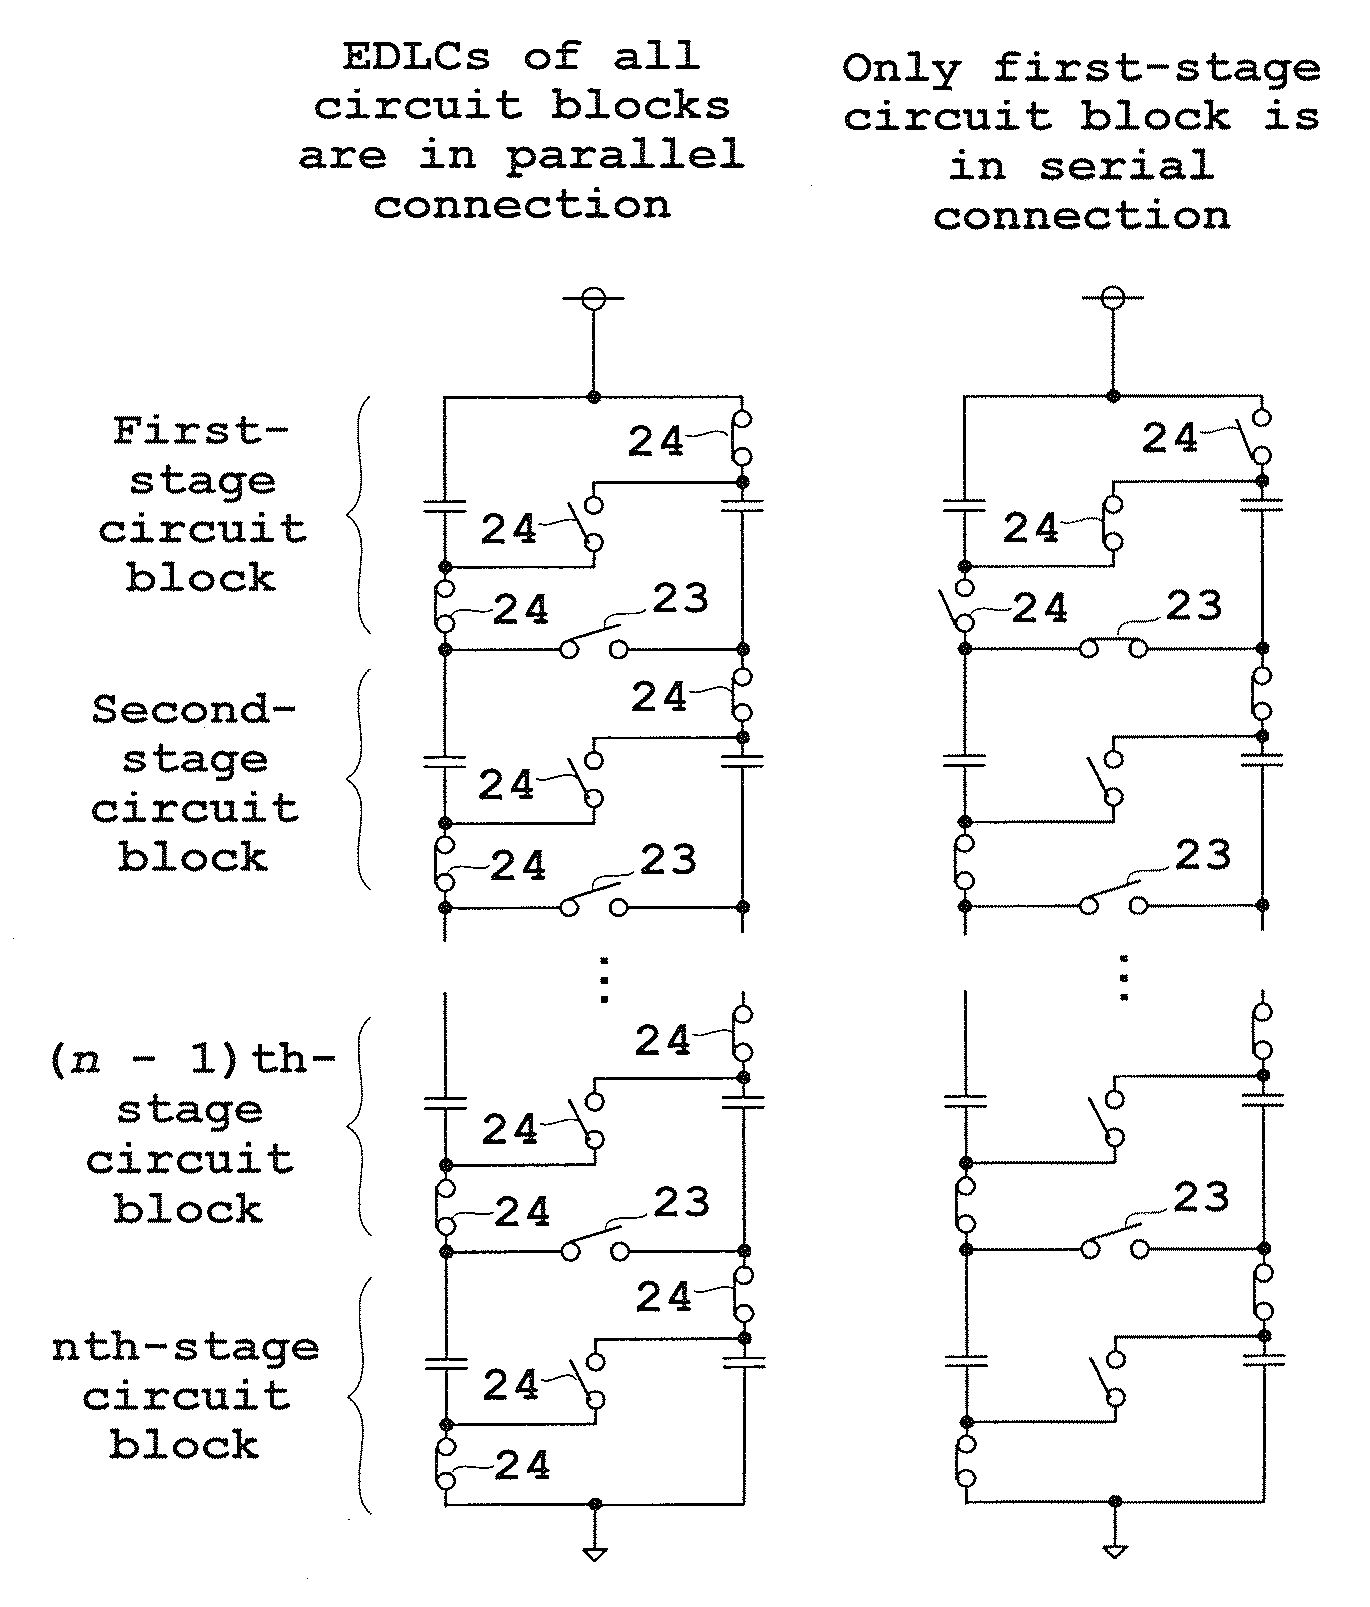 Electric power storage system using capacitors and control method thereof including serial-parallel switching means for each circuit block of batteries based on descending order of block voltages